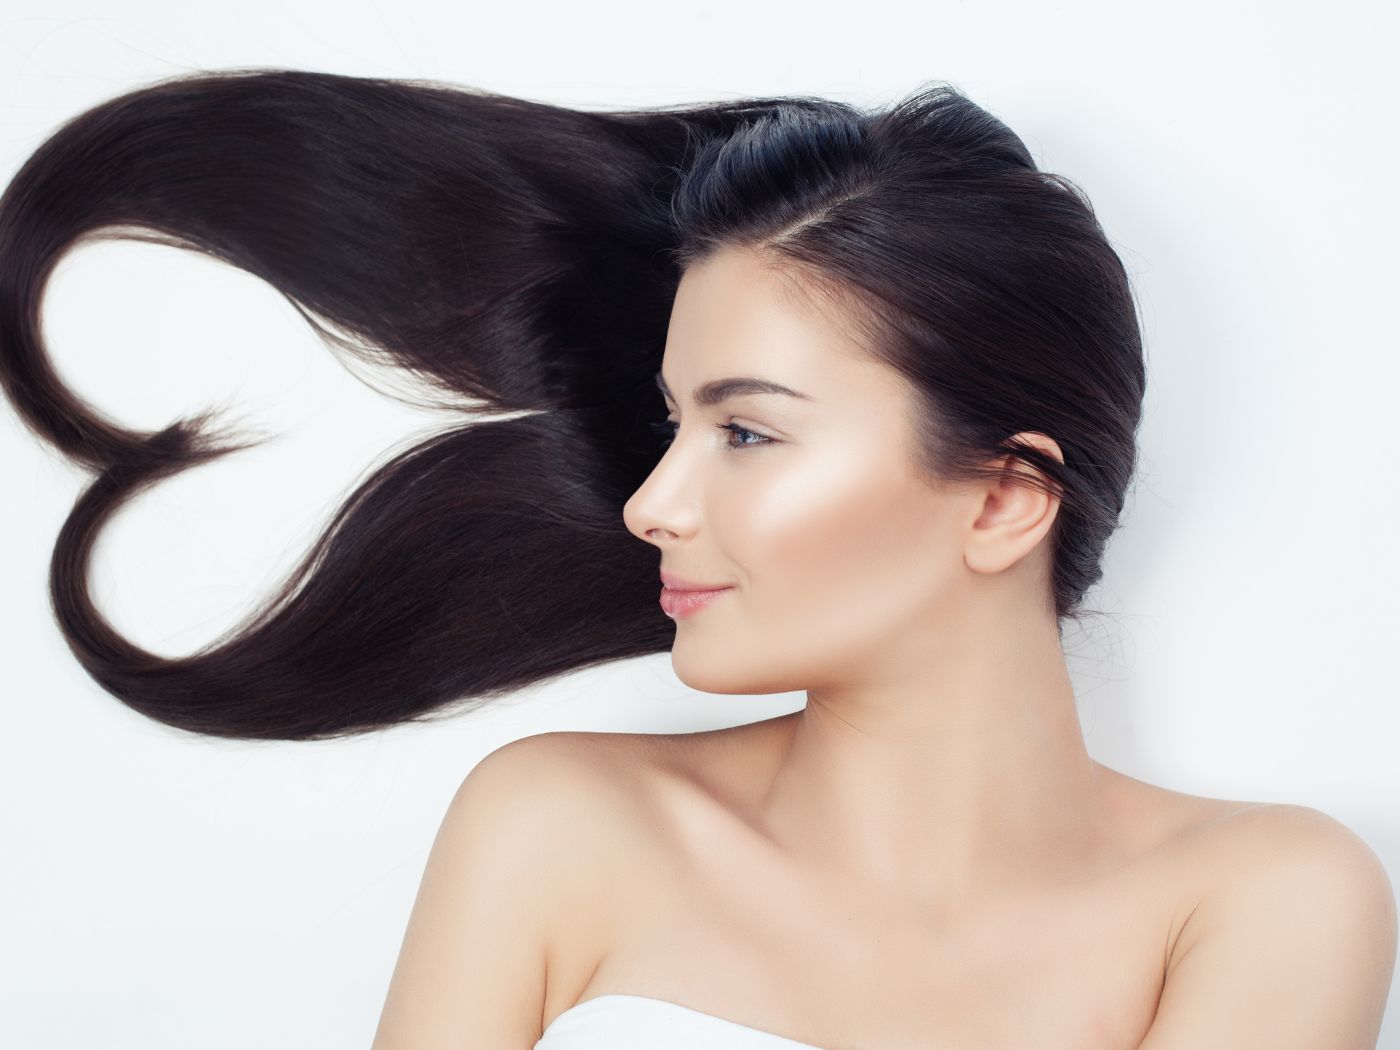 5 things you shouldn't do to have good hair - Times of India